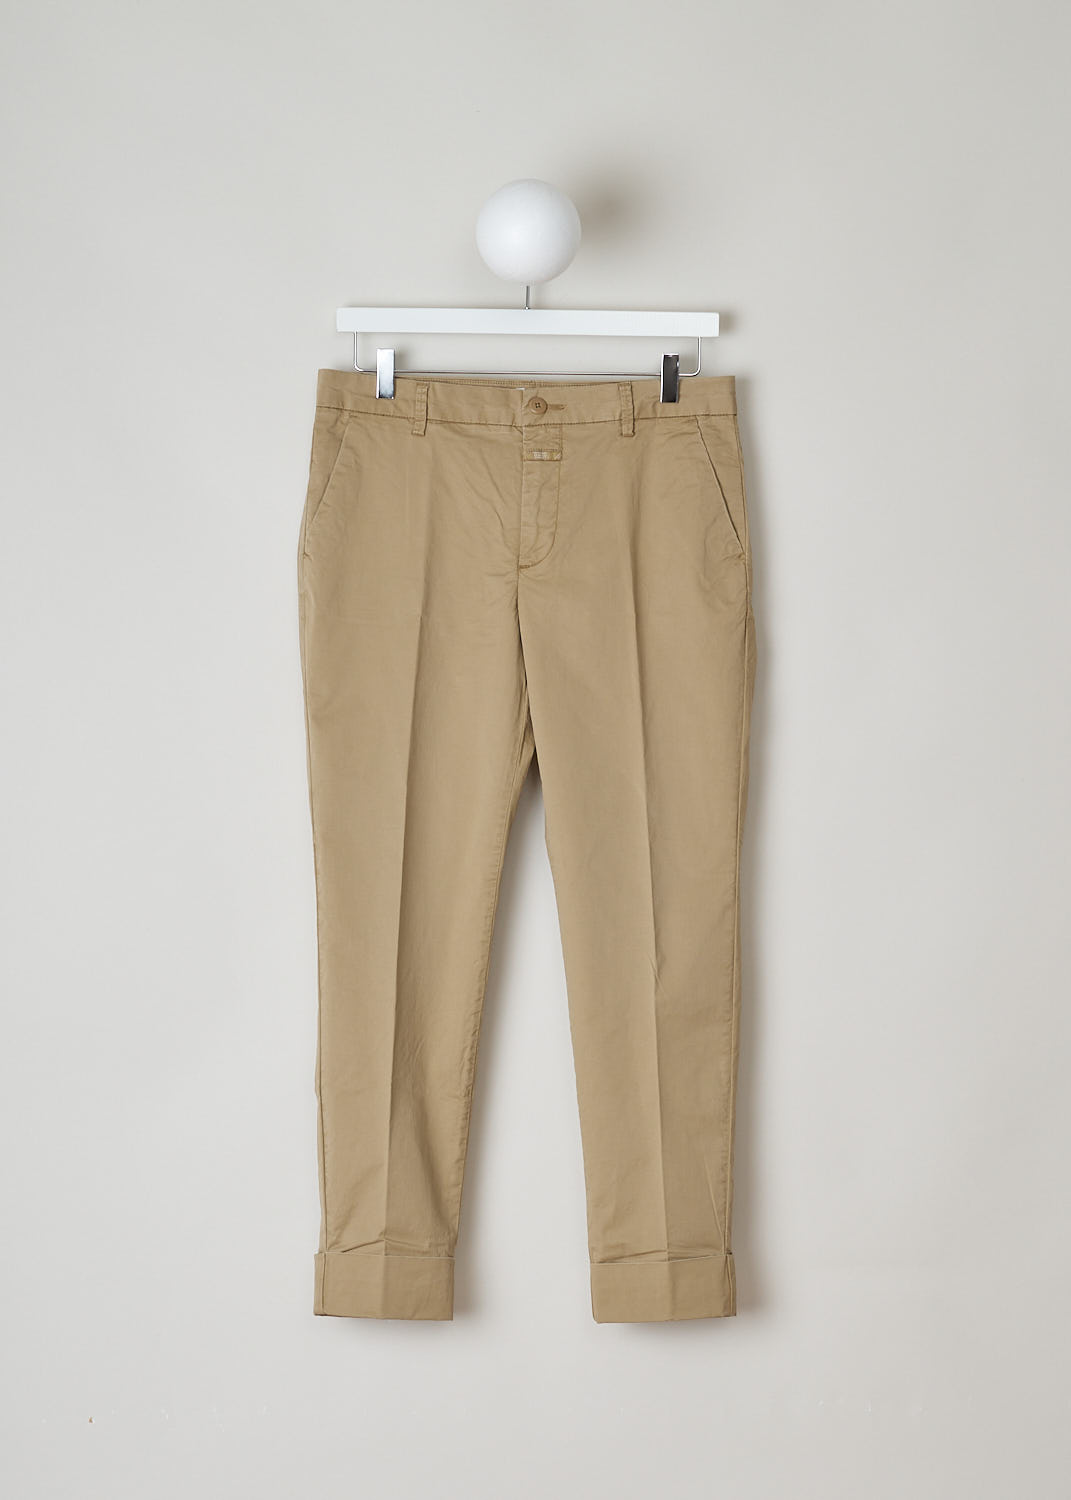 STEWART_C91796_53S_SR_919 CLOSED CLASSIC BEIGE TROUSERS Beige, Front, These classic trousers in beige feature belt loops and a zipper and button closure. They feature slanted pockets on the front and two buttoned welt pockets on the back. What makes this model stand out the is the broad fold-over hem.
 